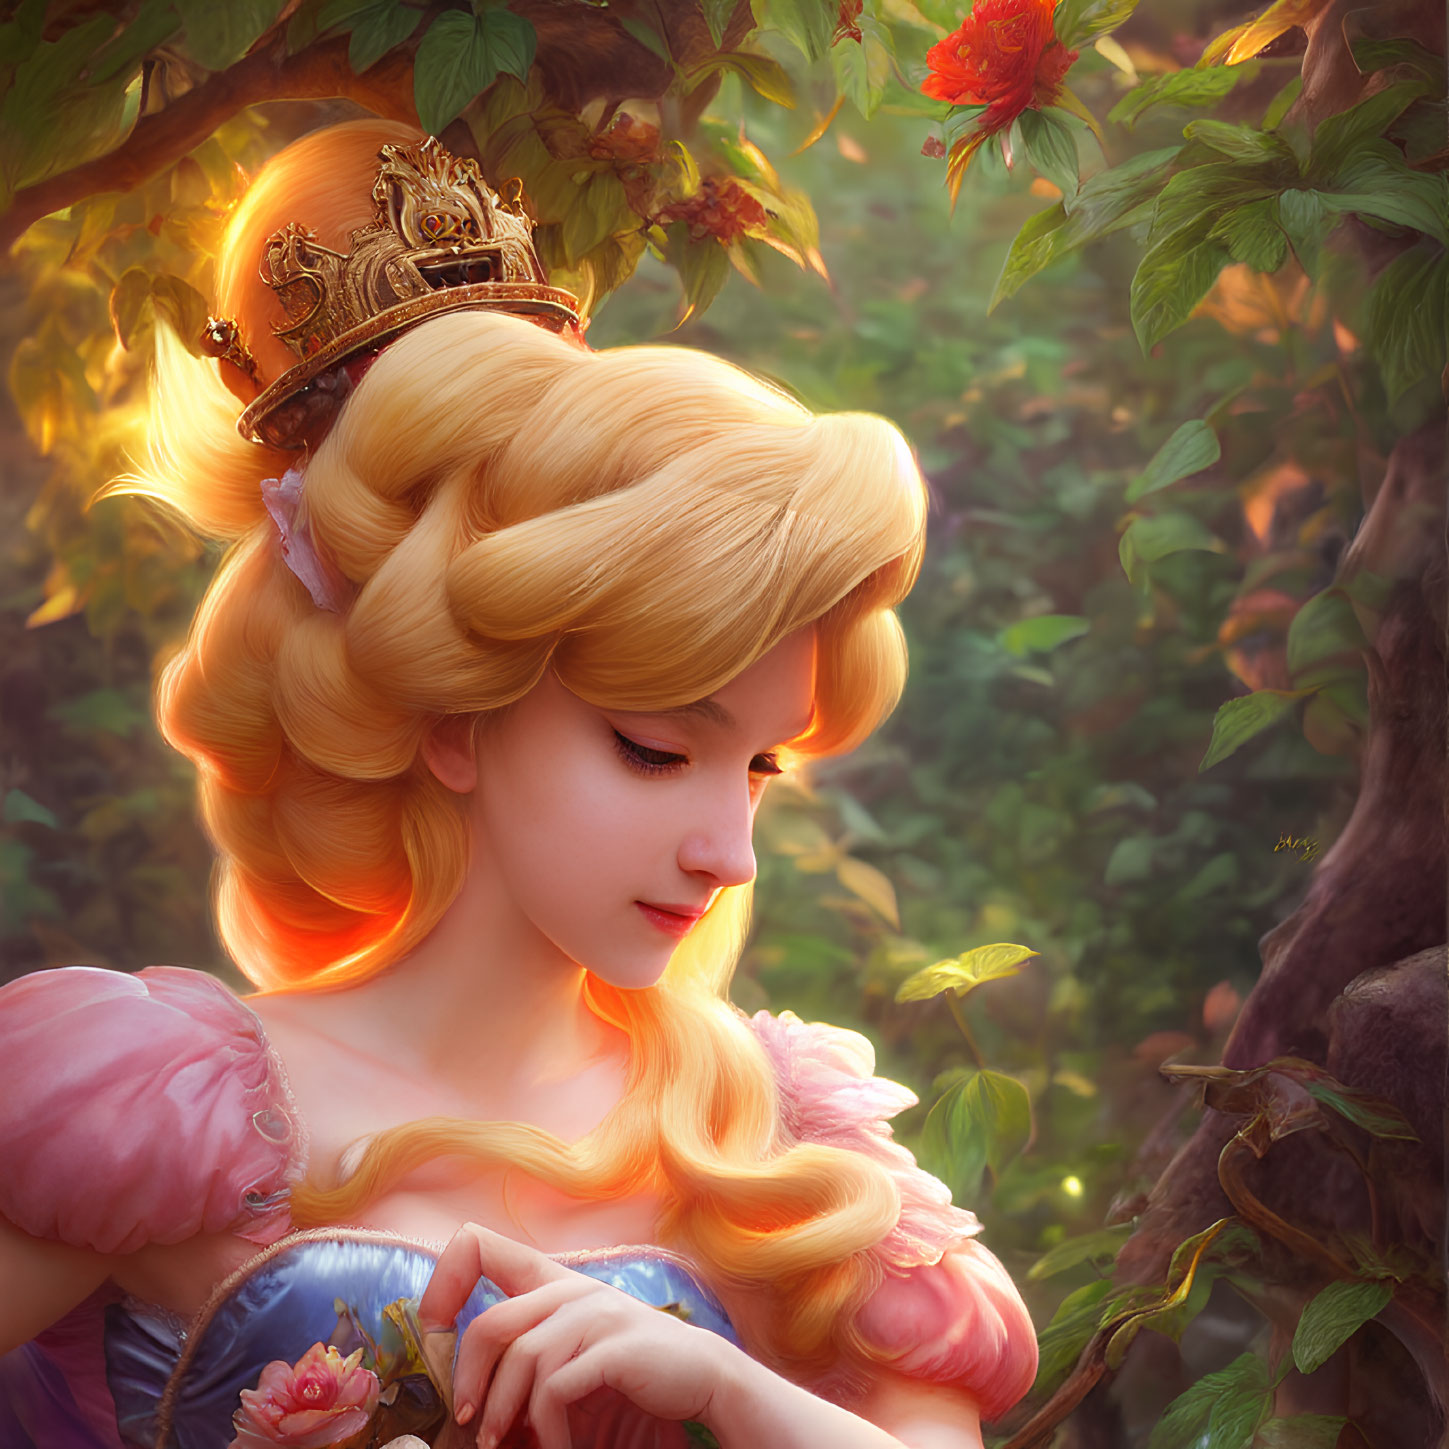 Golden-haired princess with crown holding bird in sunlit forest.